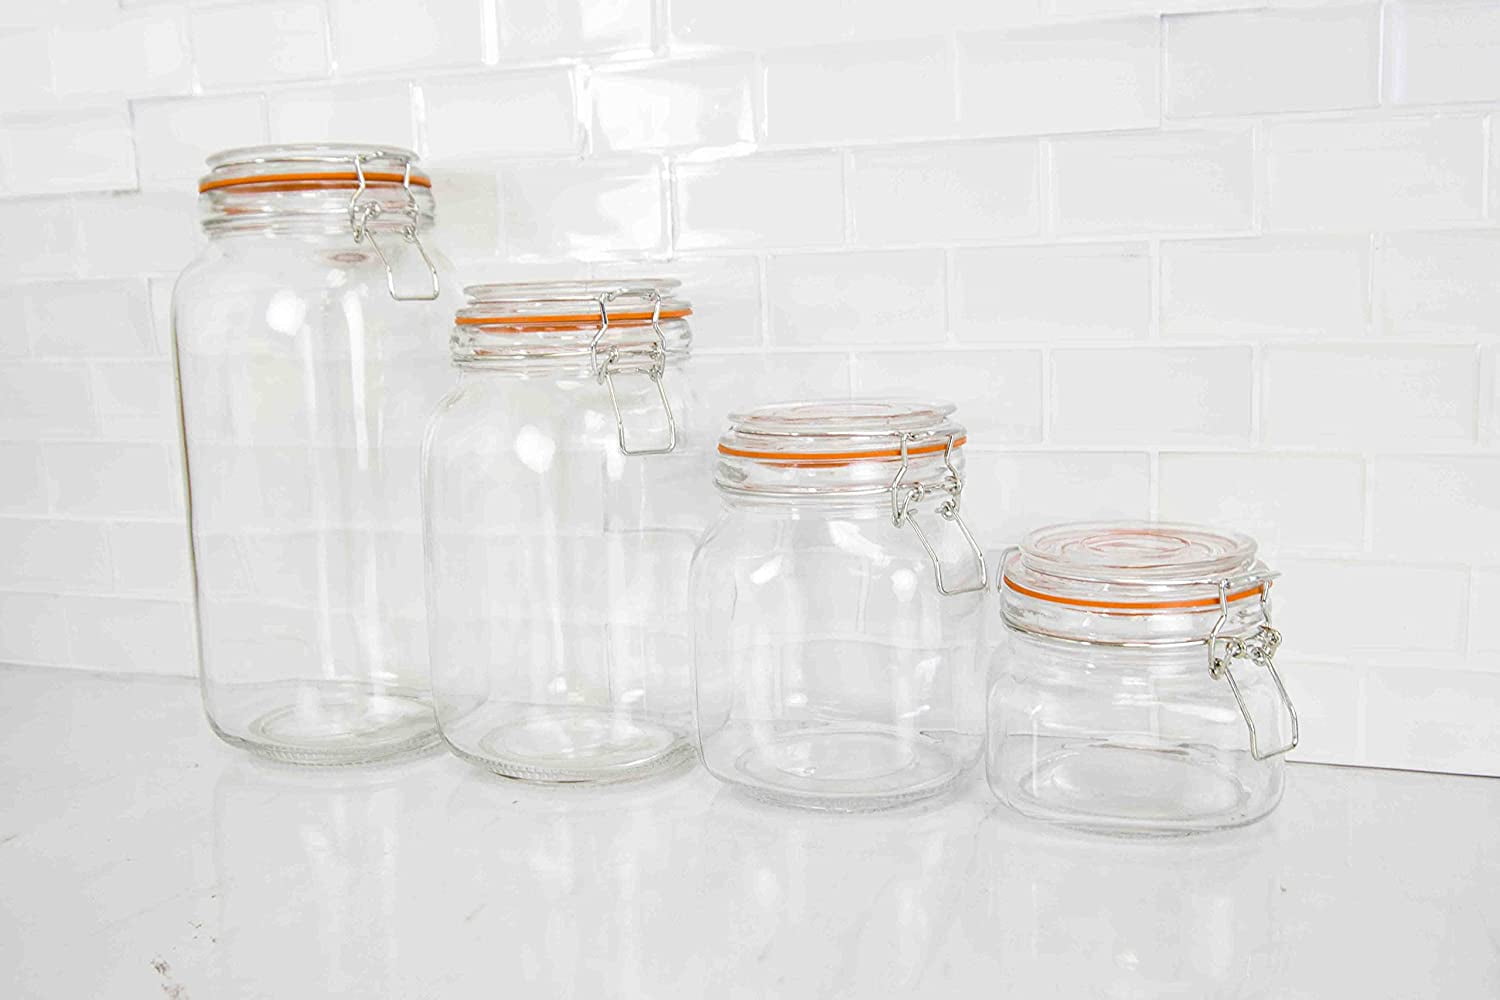 Home Basics 4-Piece Glass Canister Set, Clear